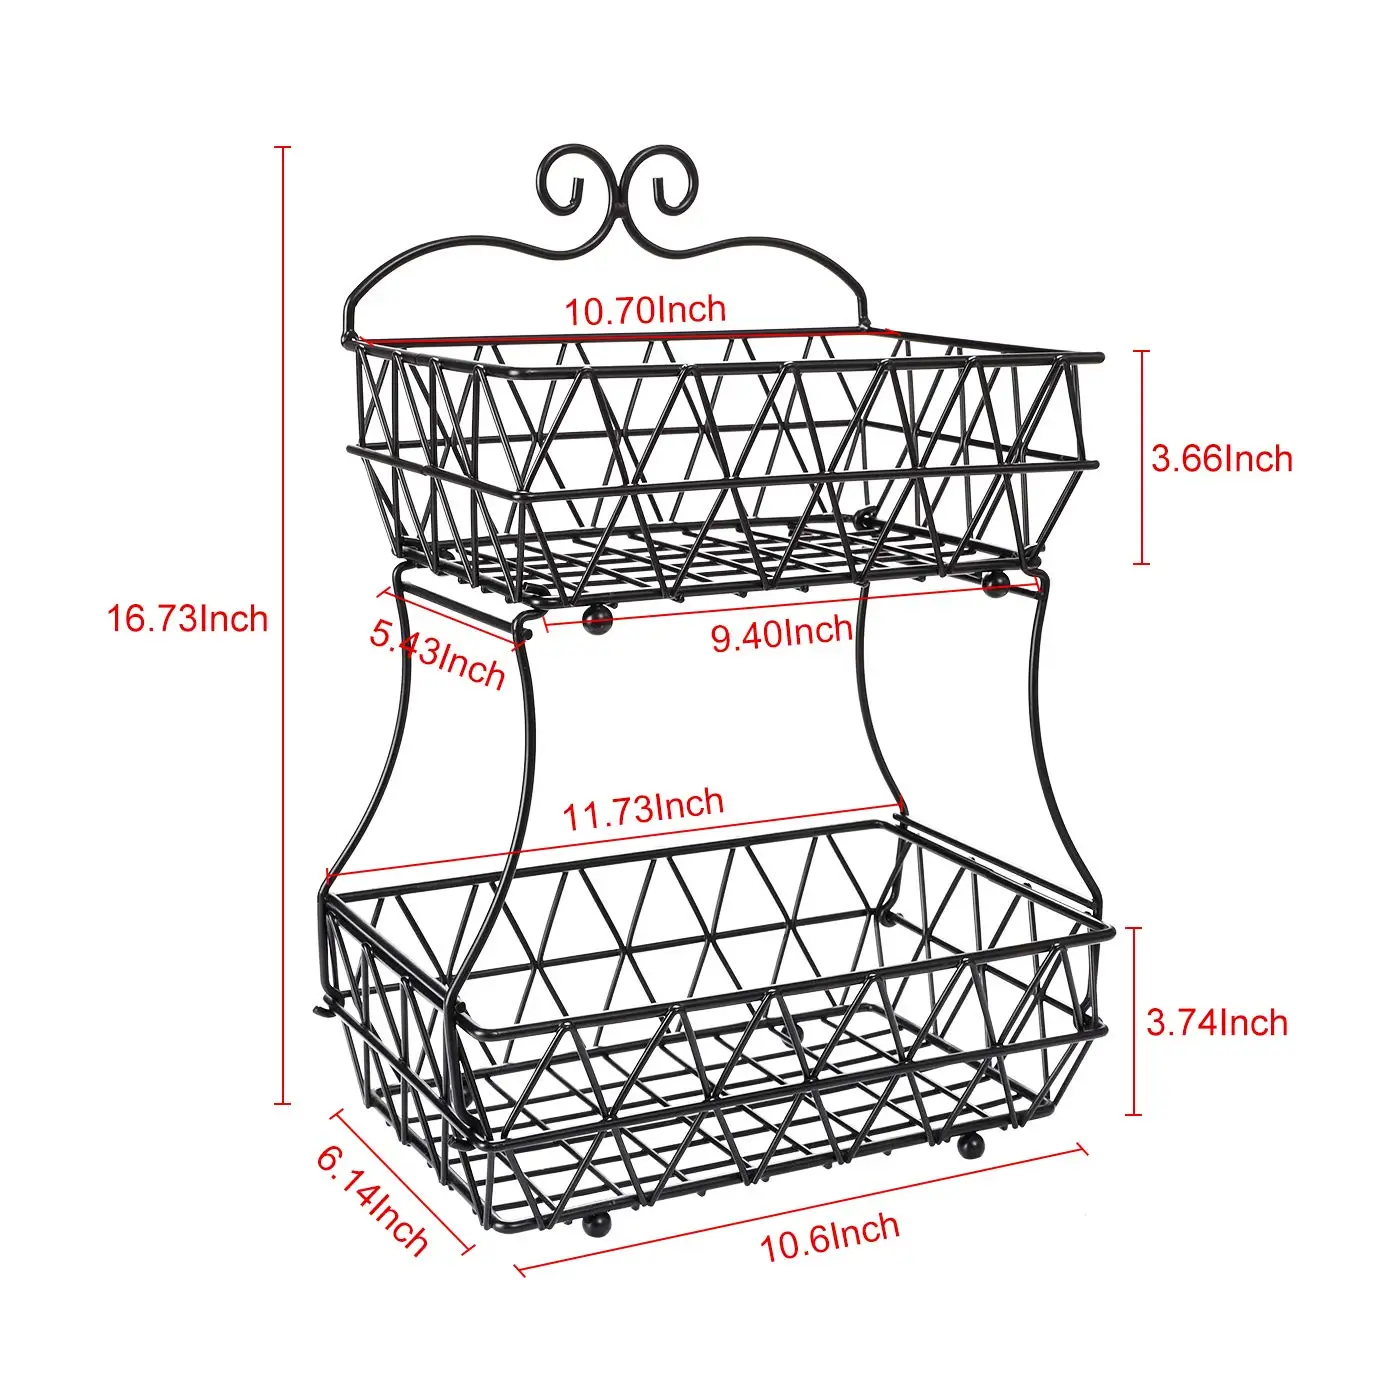 Home kitchen living room detachable multi-functional 2 tiers stainless steel fruit and vegetable basket